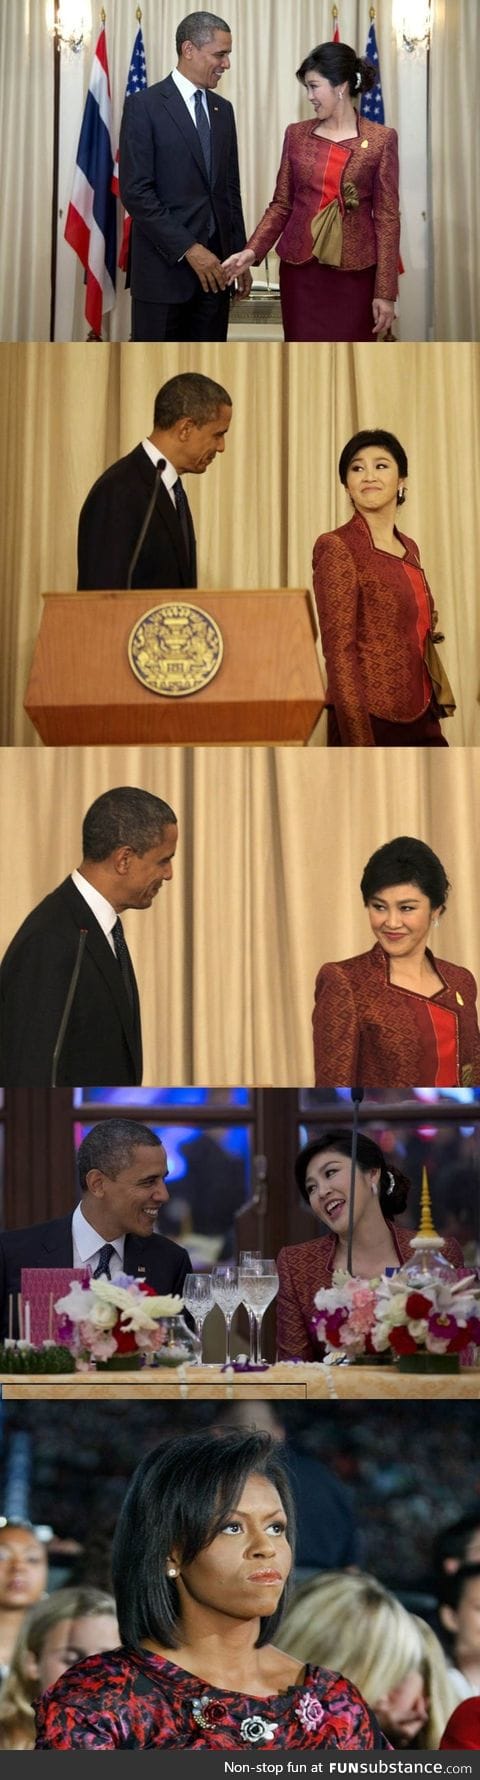 Obama and Thailand's prime minister